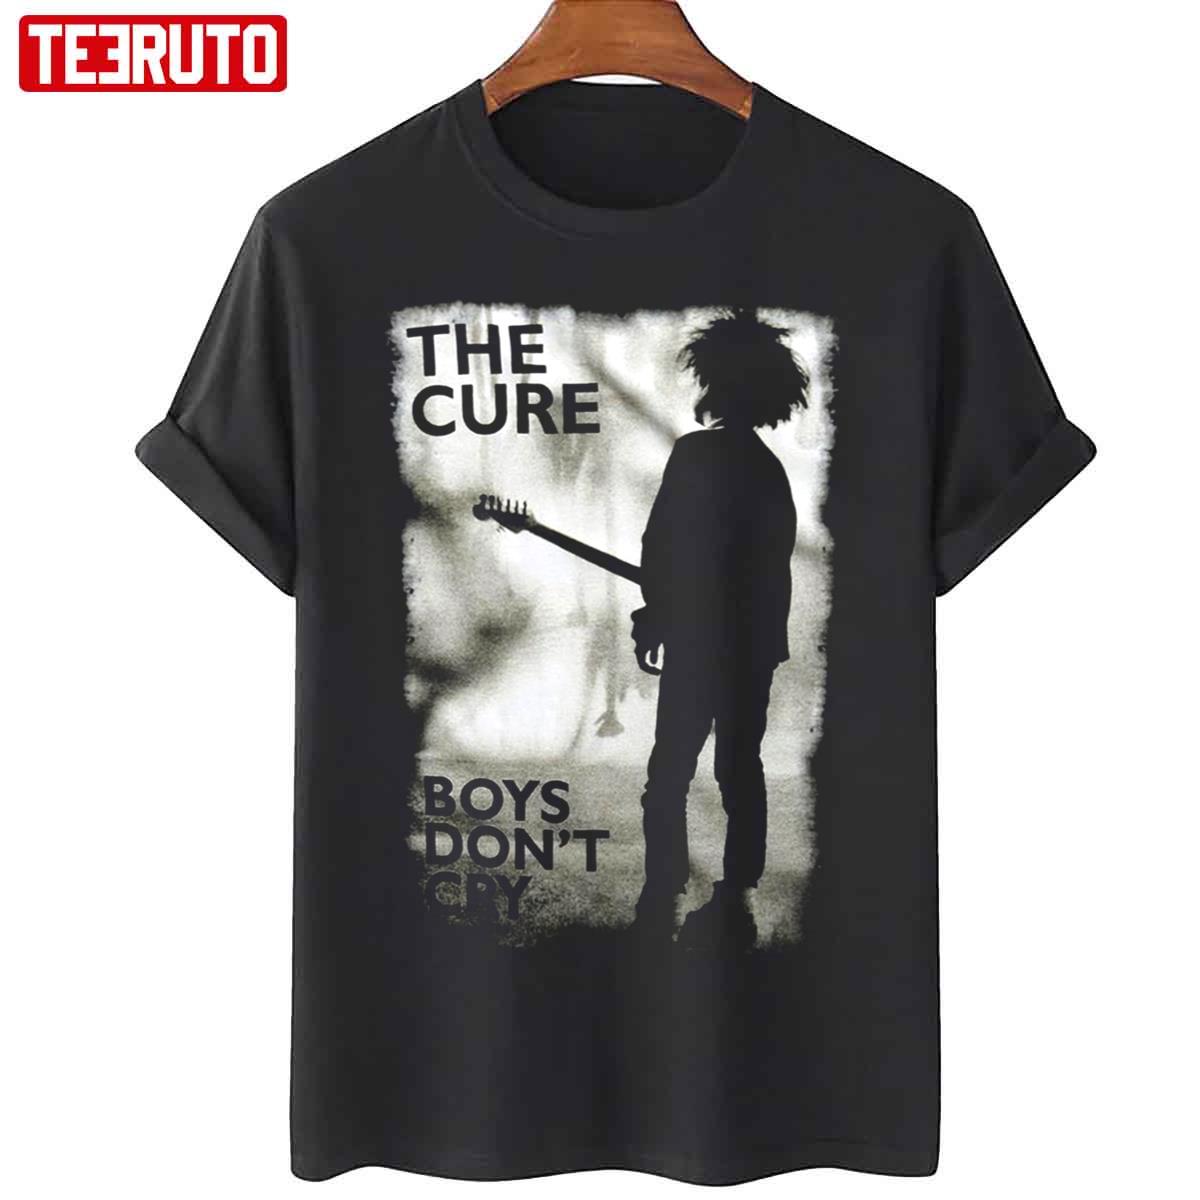 The Cure Boys Don’t Cry Unisex T-Shirt